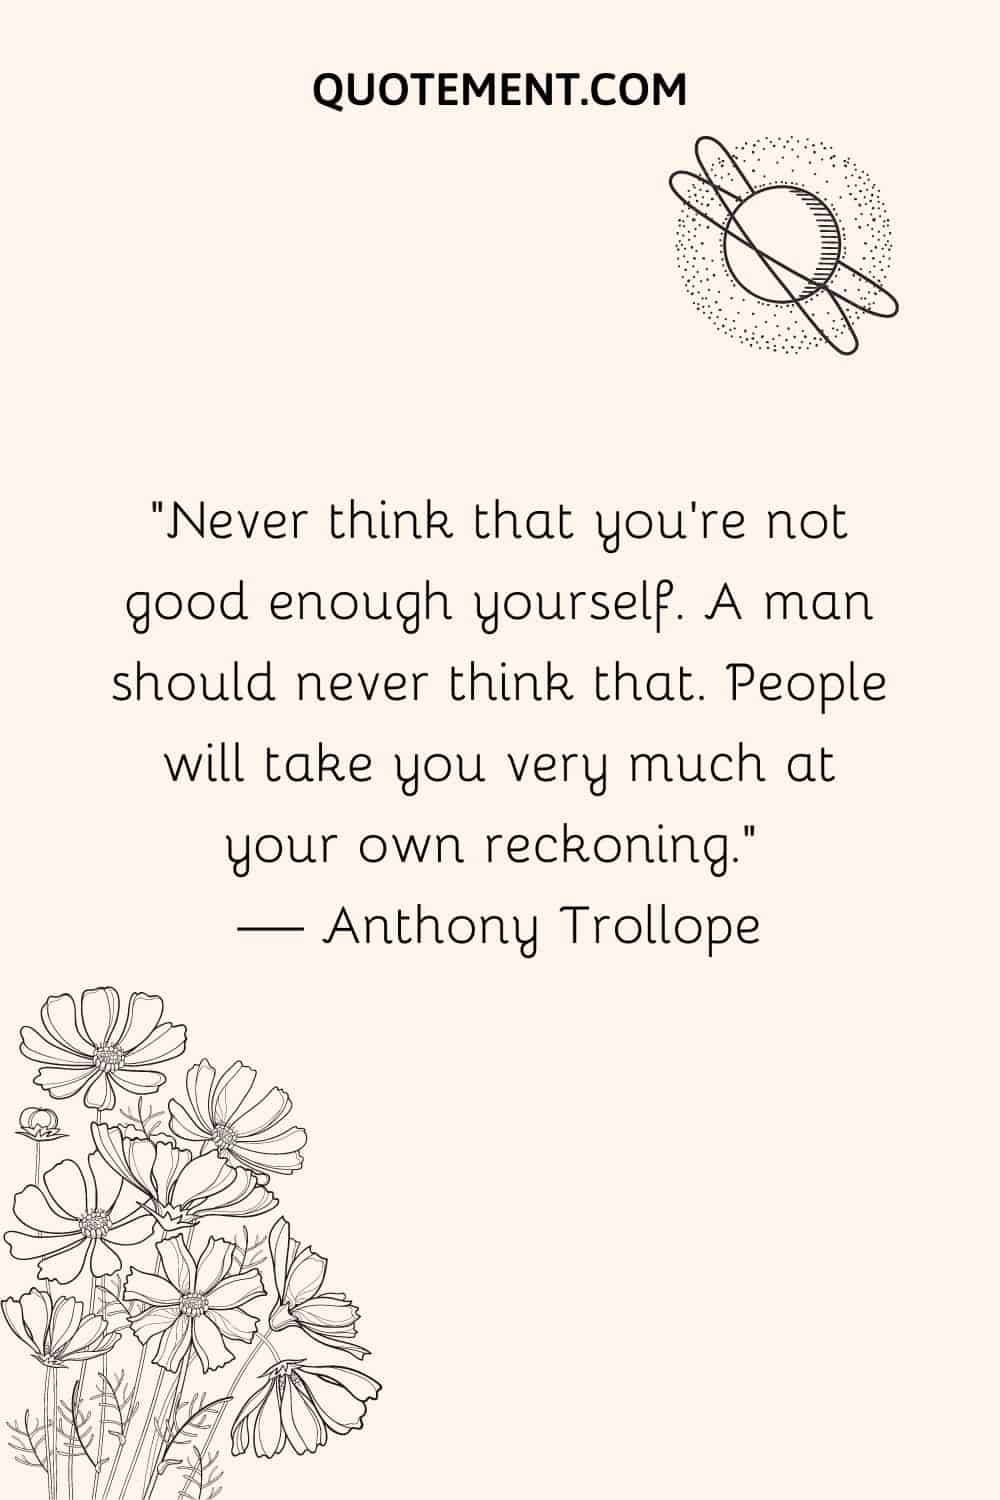 Never think that you’re not good enough yourself.